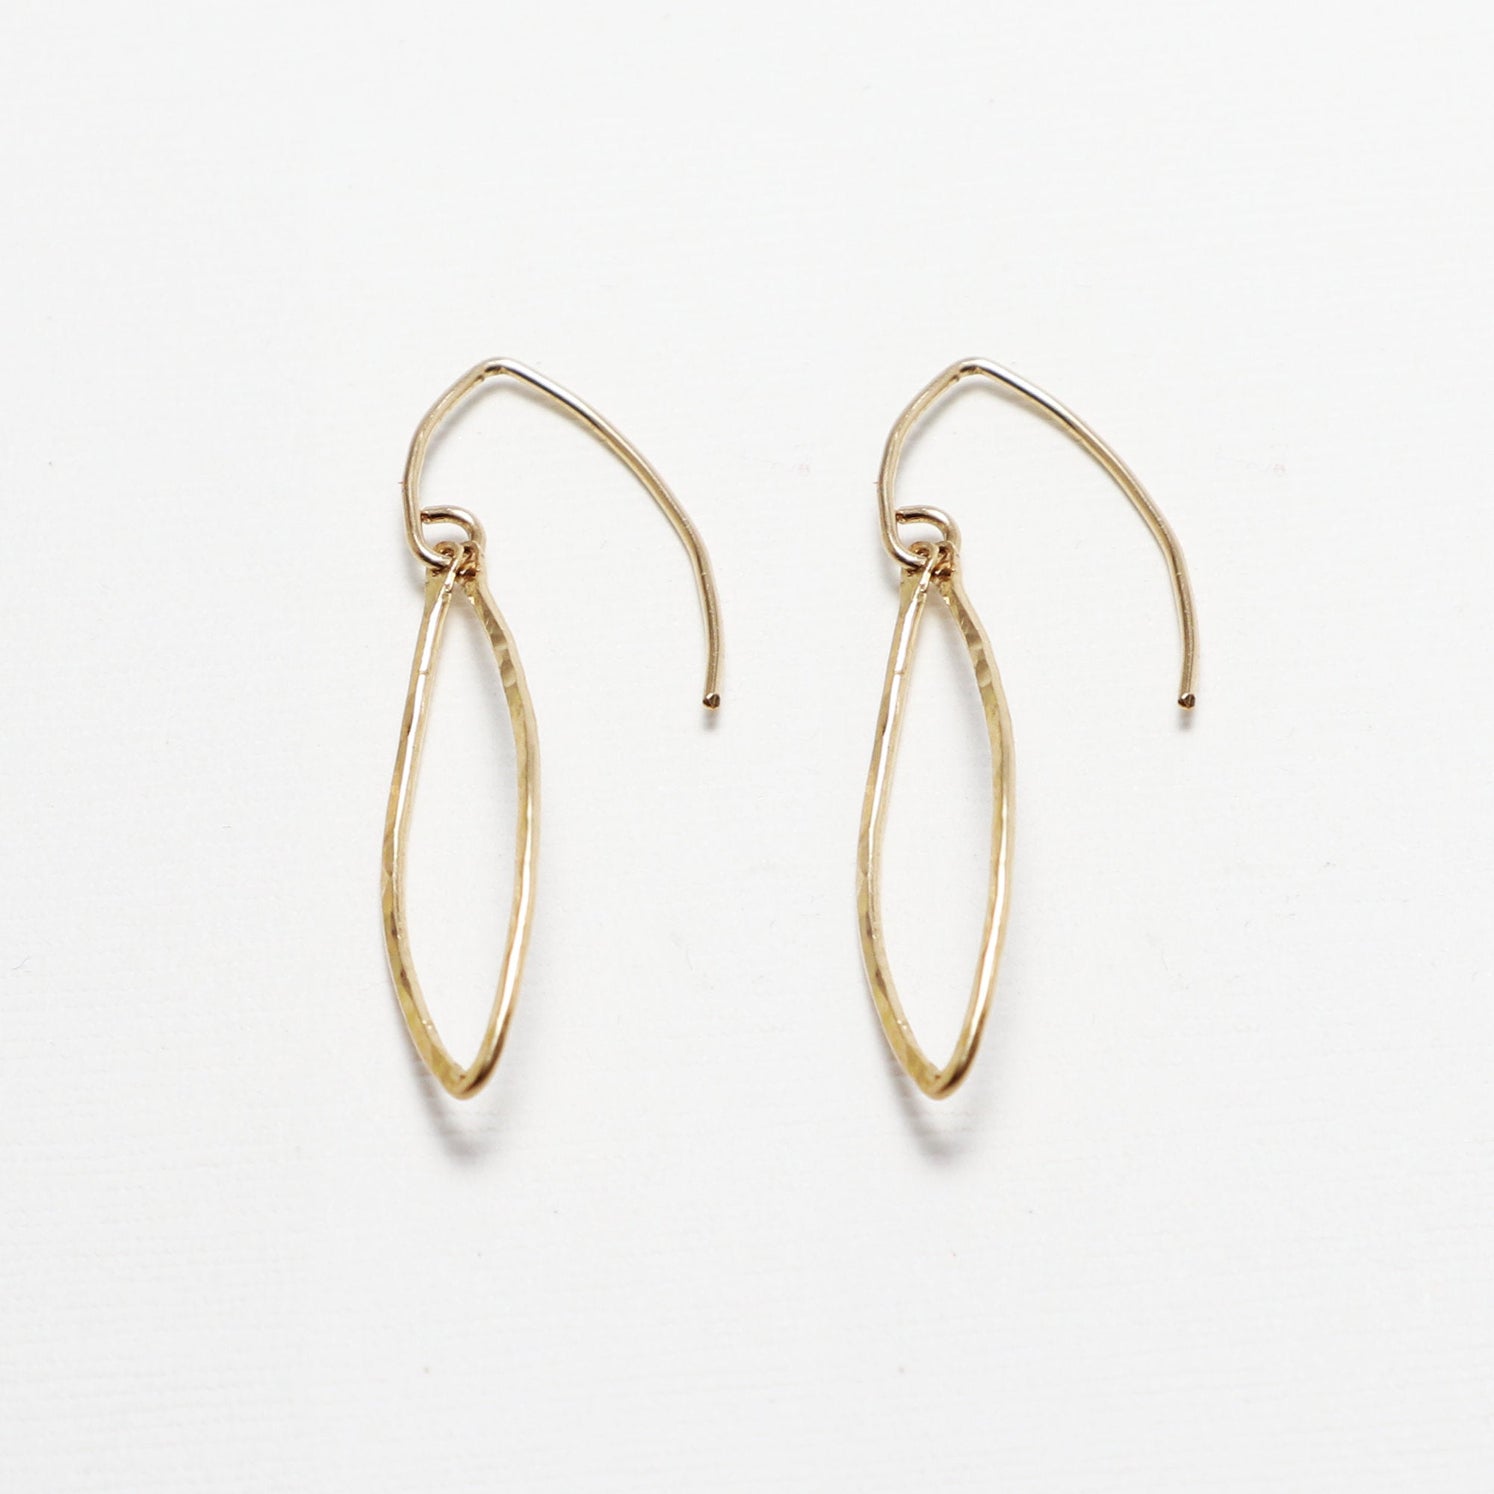 Evermore Dangle Hammered Earrings